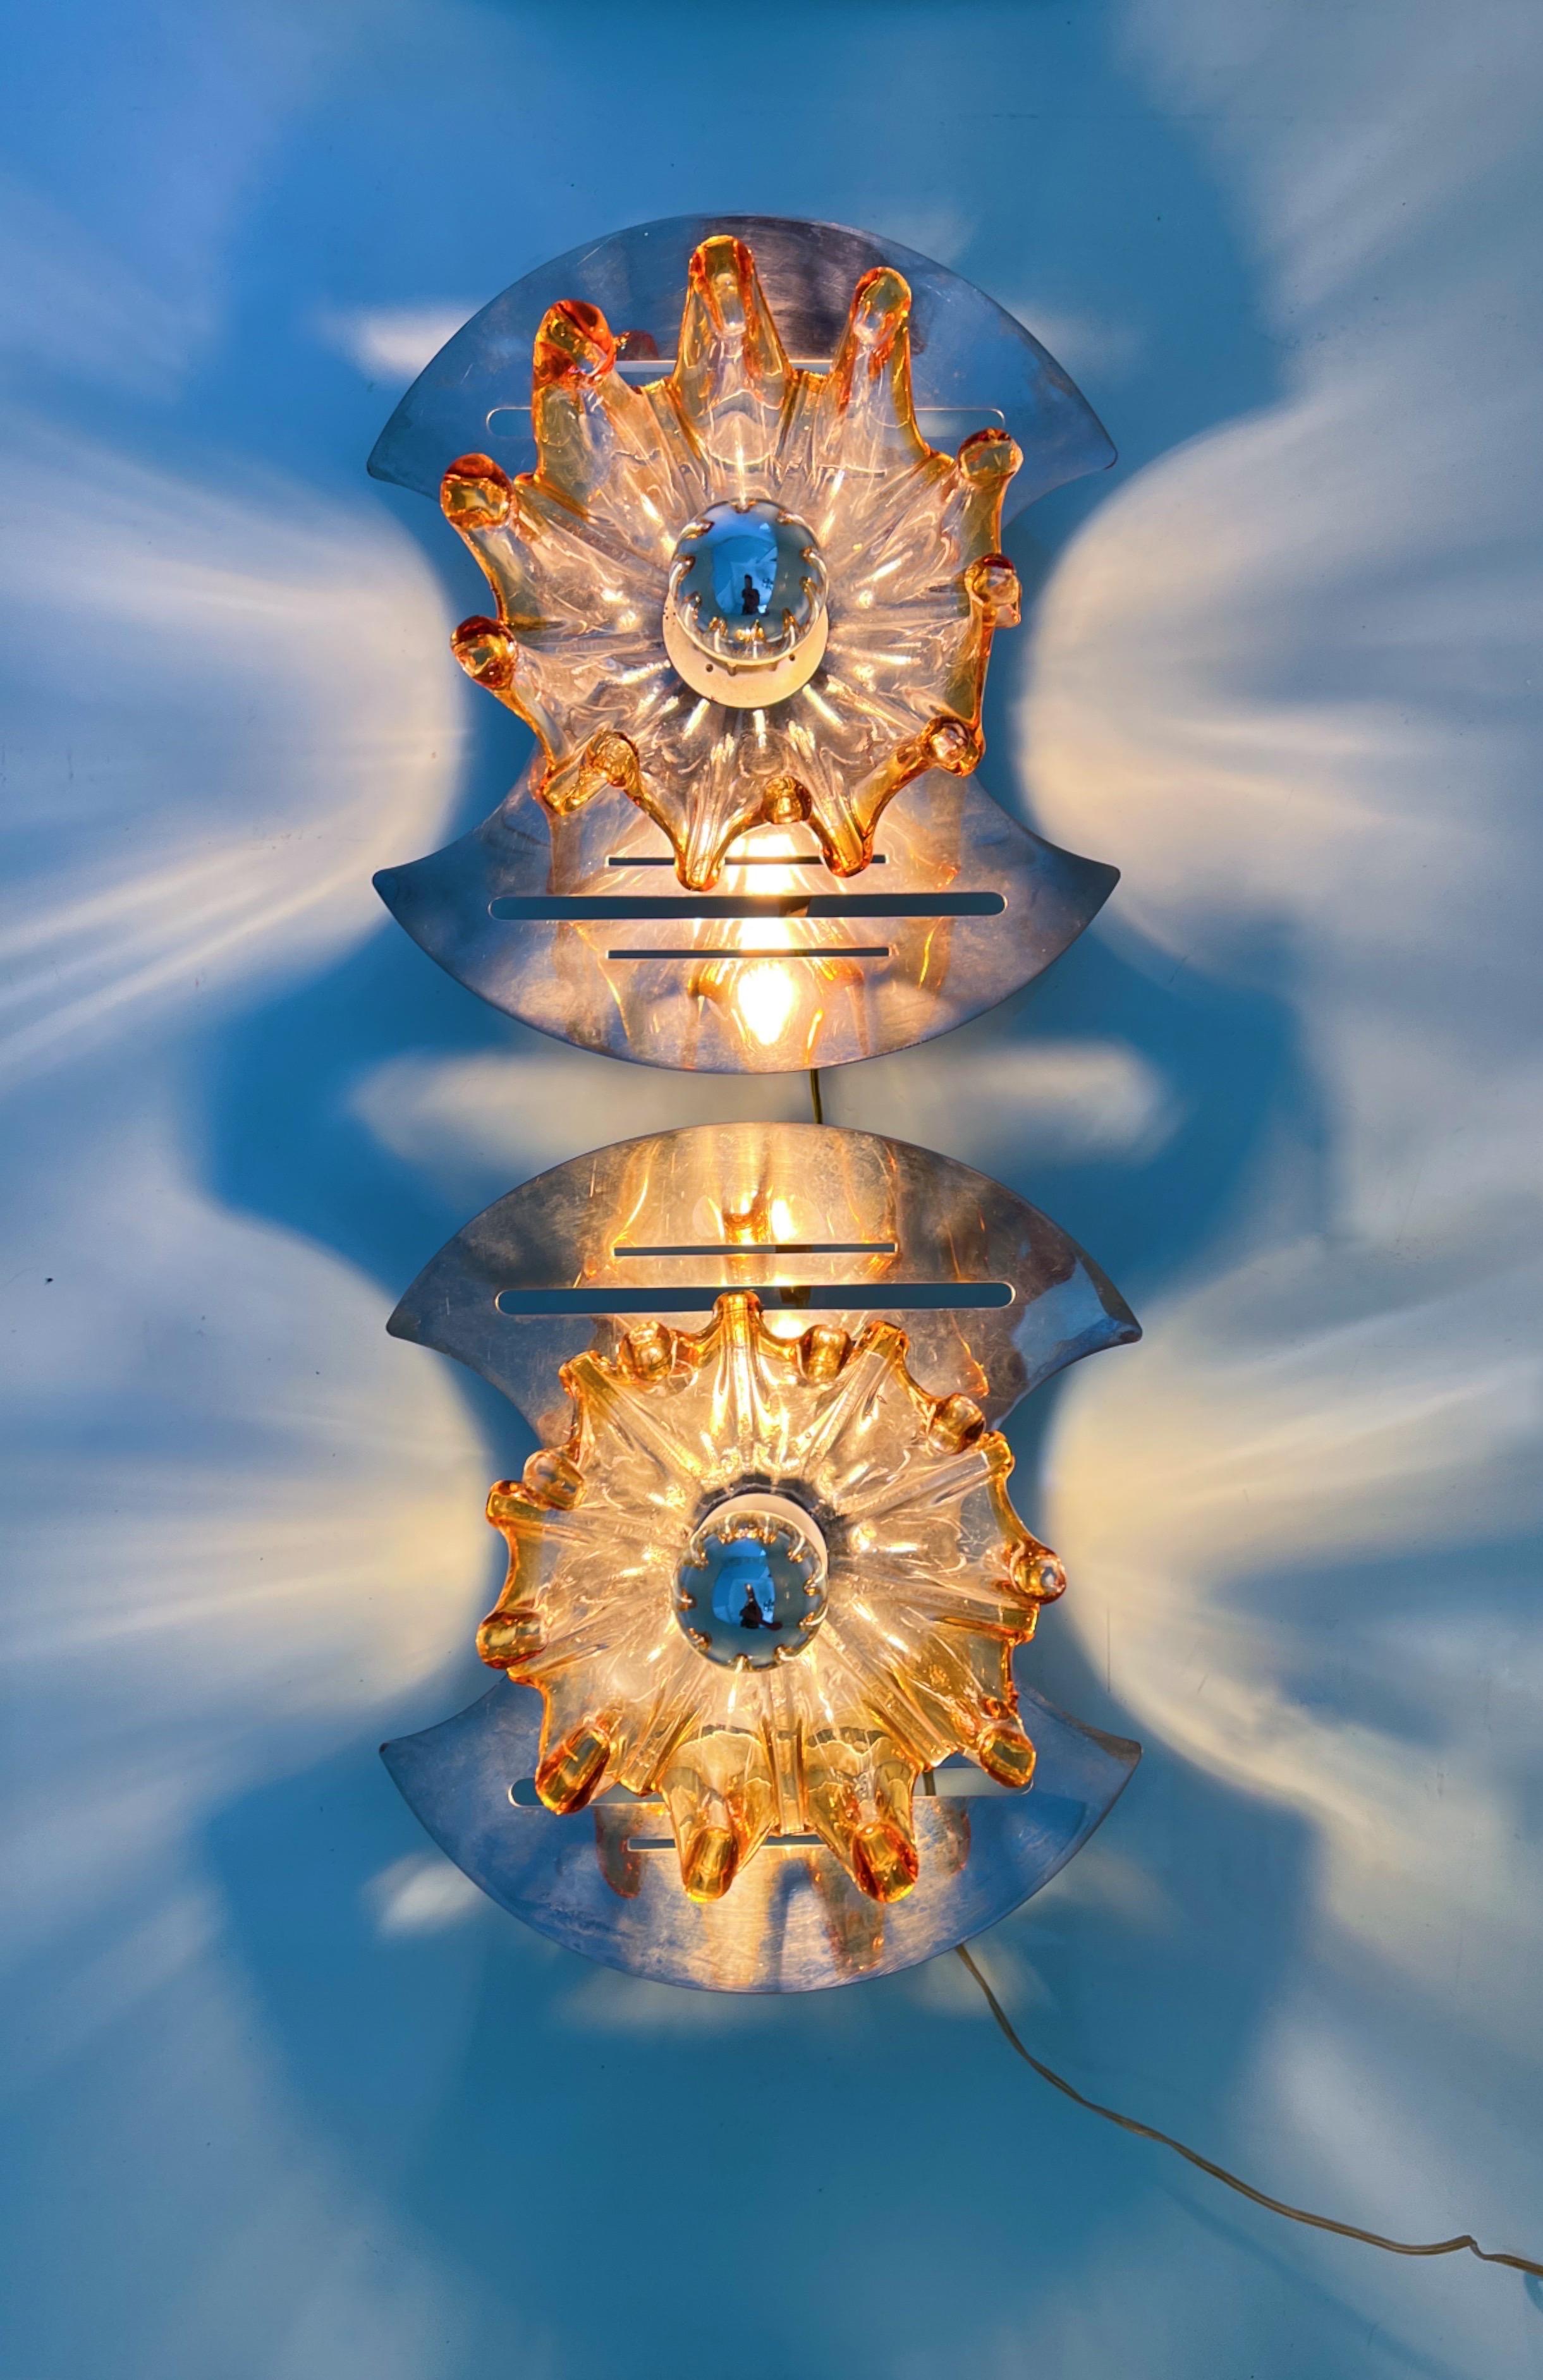 Wall light envisioned by the Italian designer Carlo Nason. This masterpiece features a Murano glass flower delicately placed upon a futuristic metal base. The interplay of light and shadow these fixtures create is nothing short of